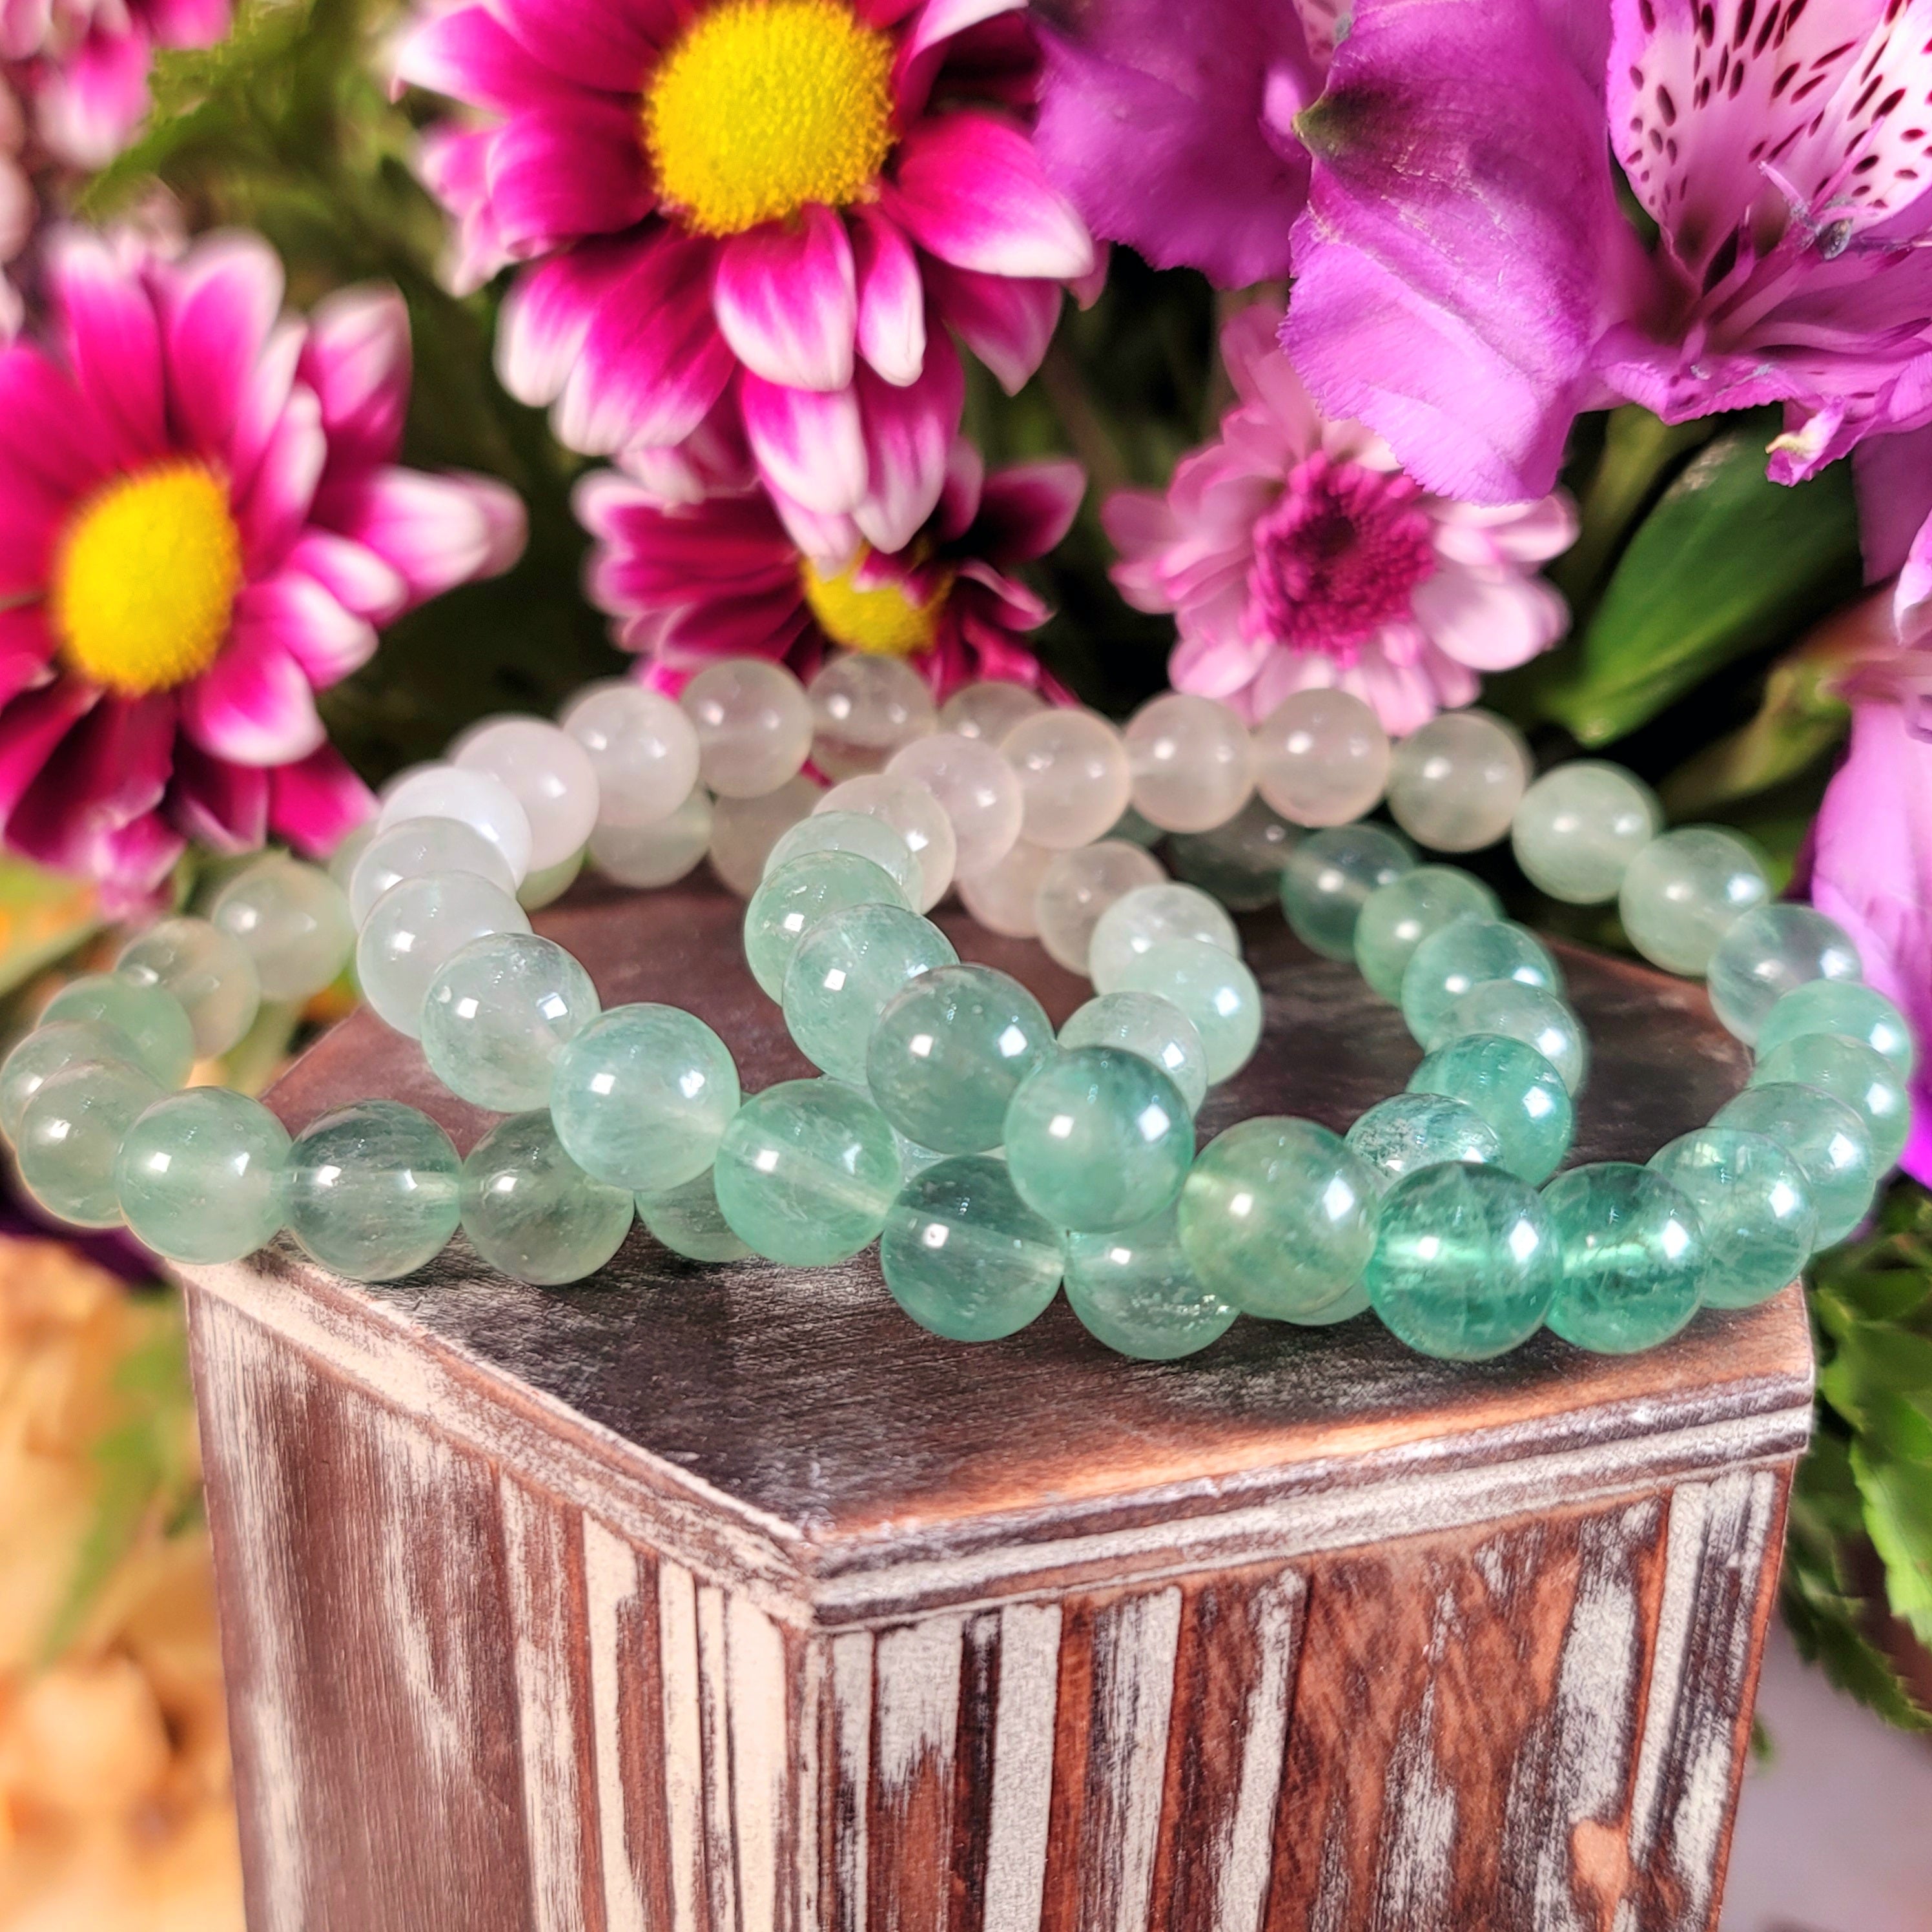 Green Fluorite Waterfall Bracelet for Focus, Learning and Releasing